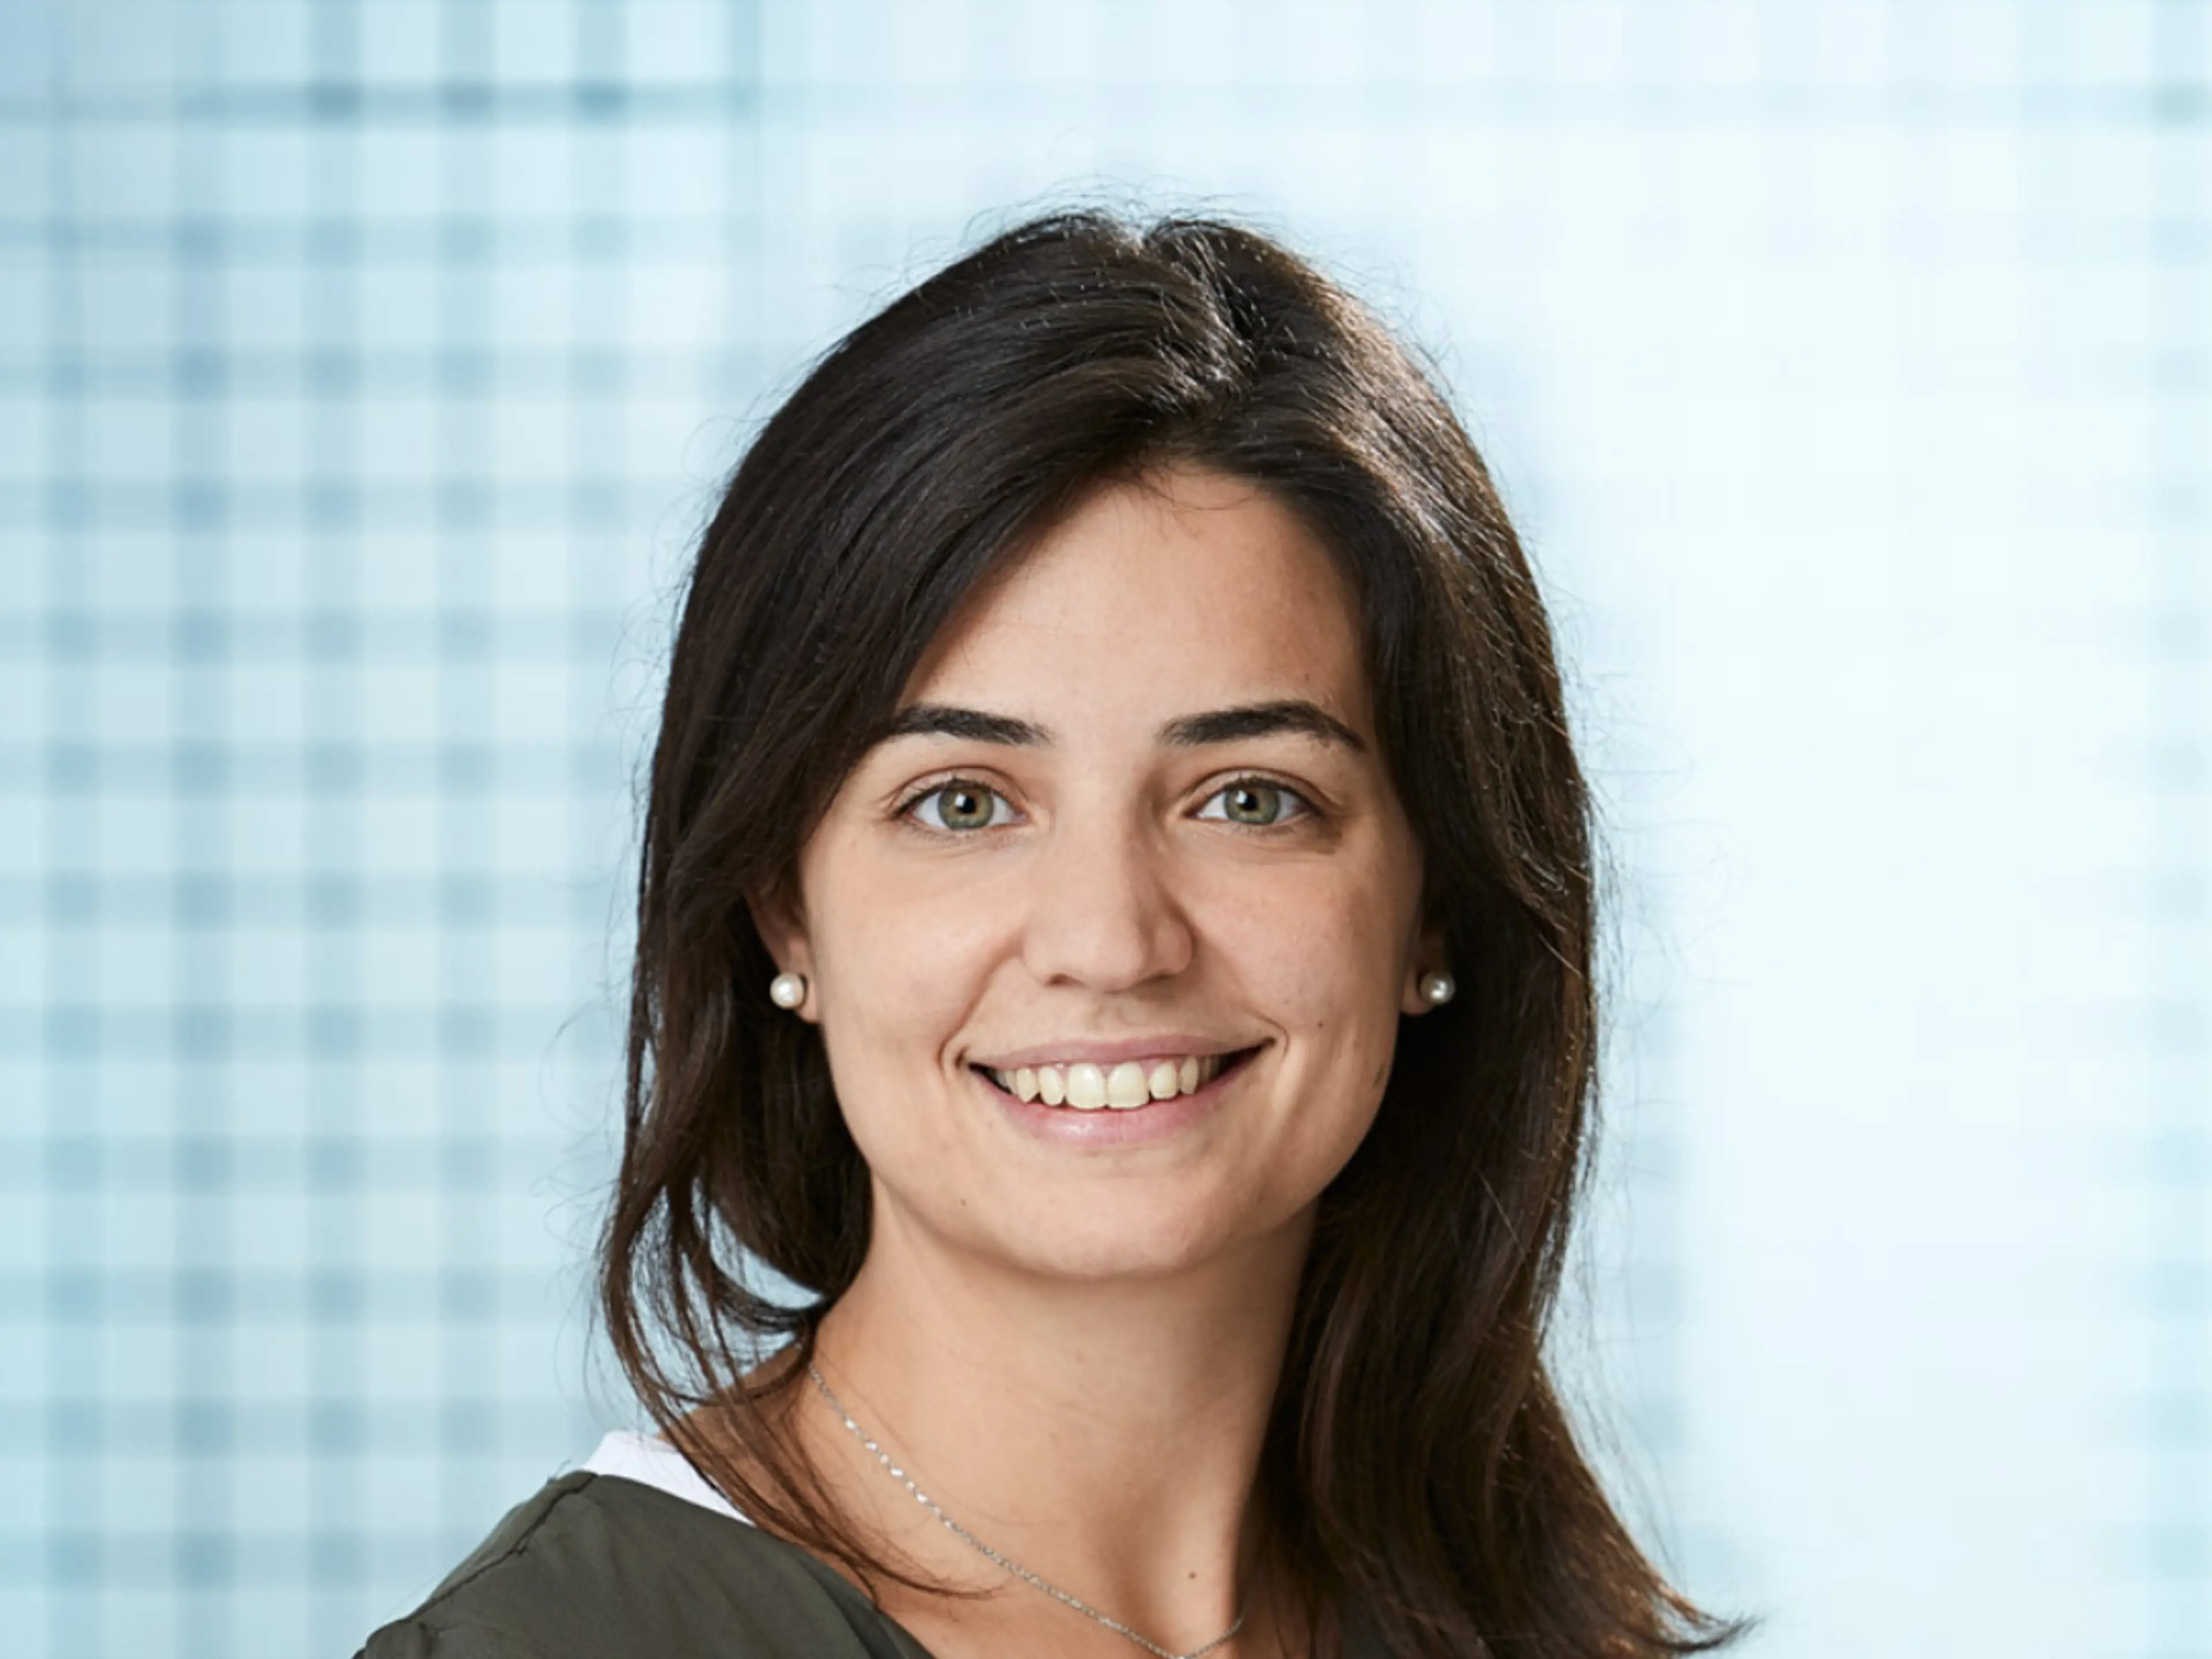 Portrait of Laura Formigo, Full-Time MBA Class of 2021